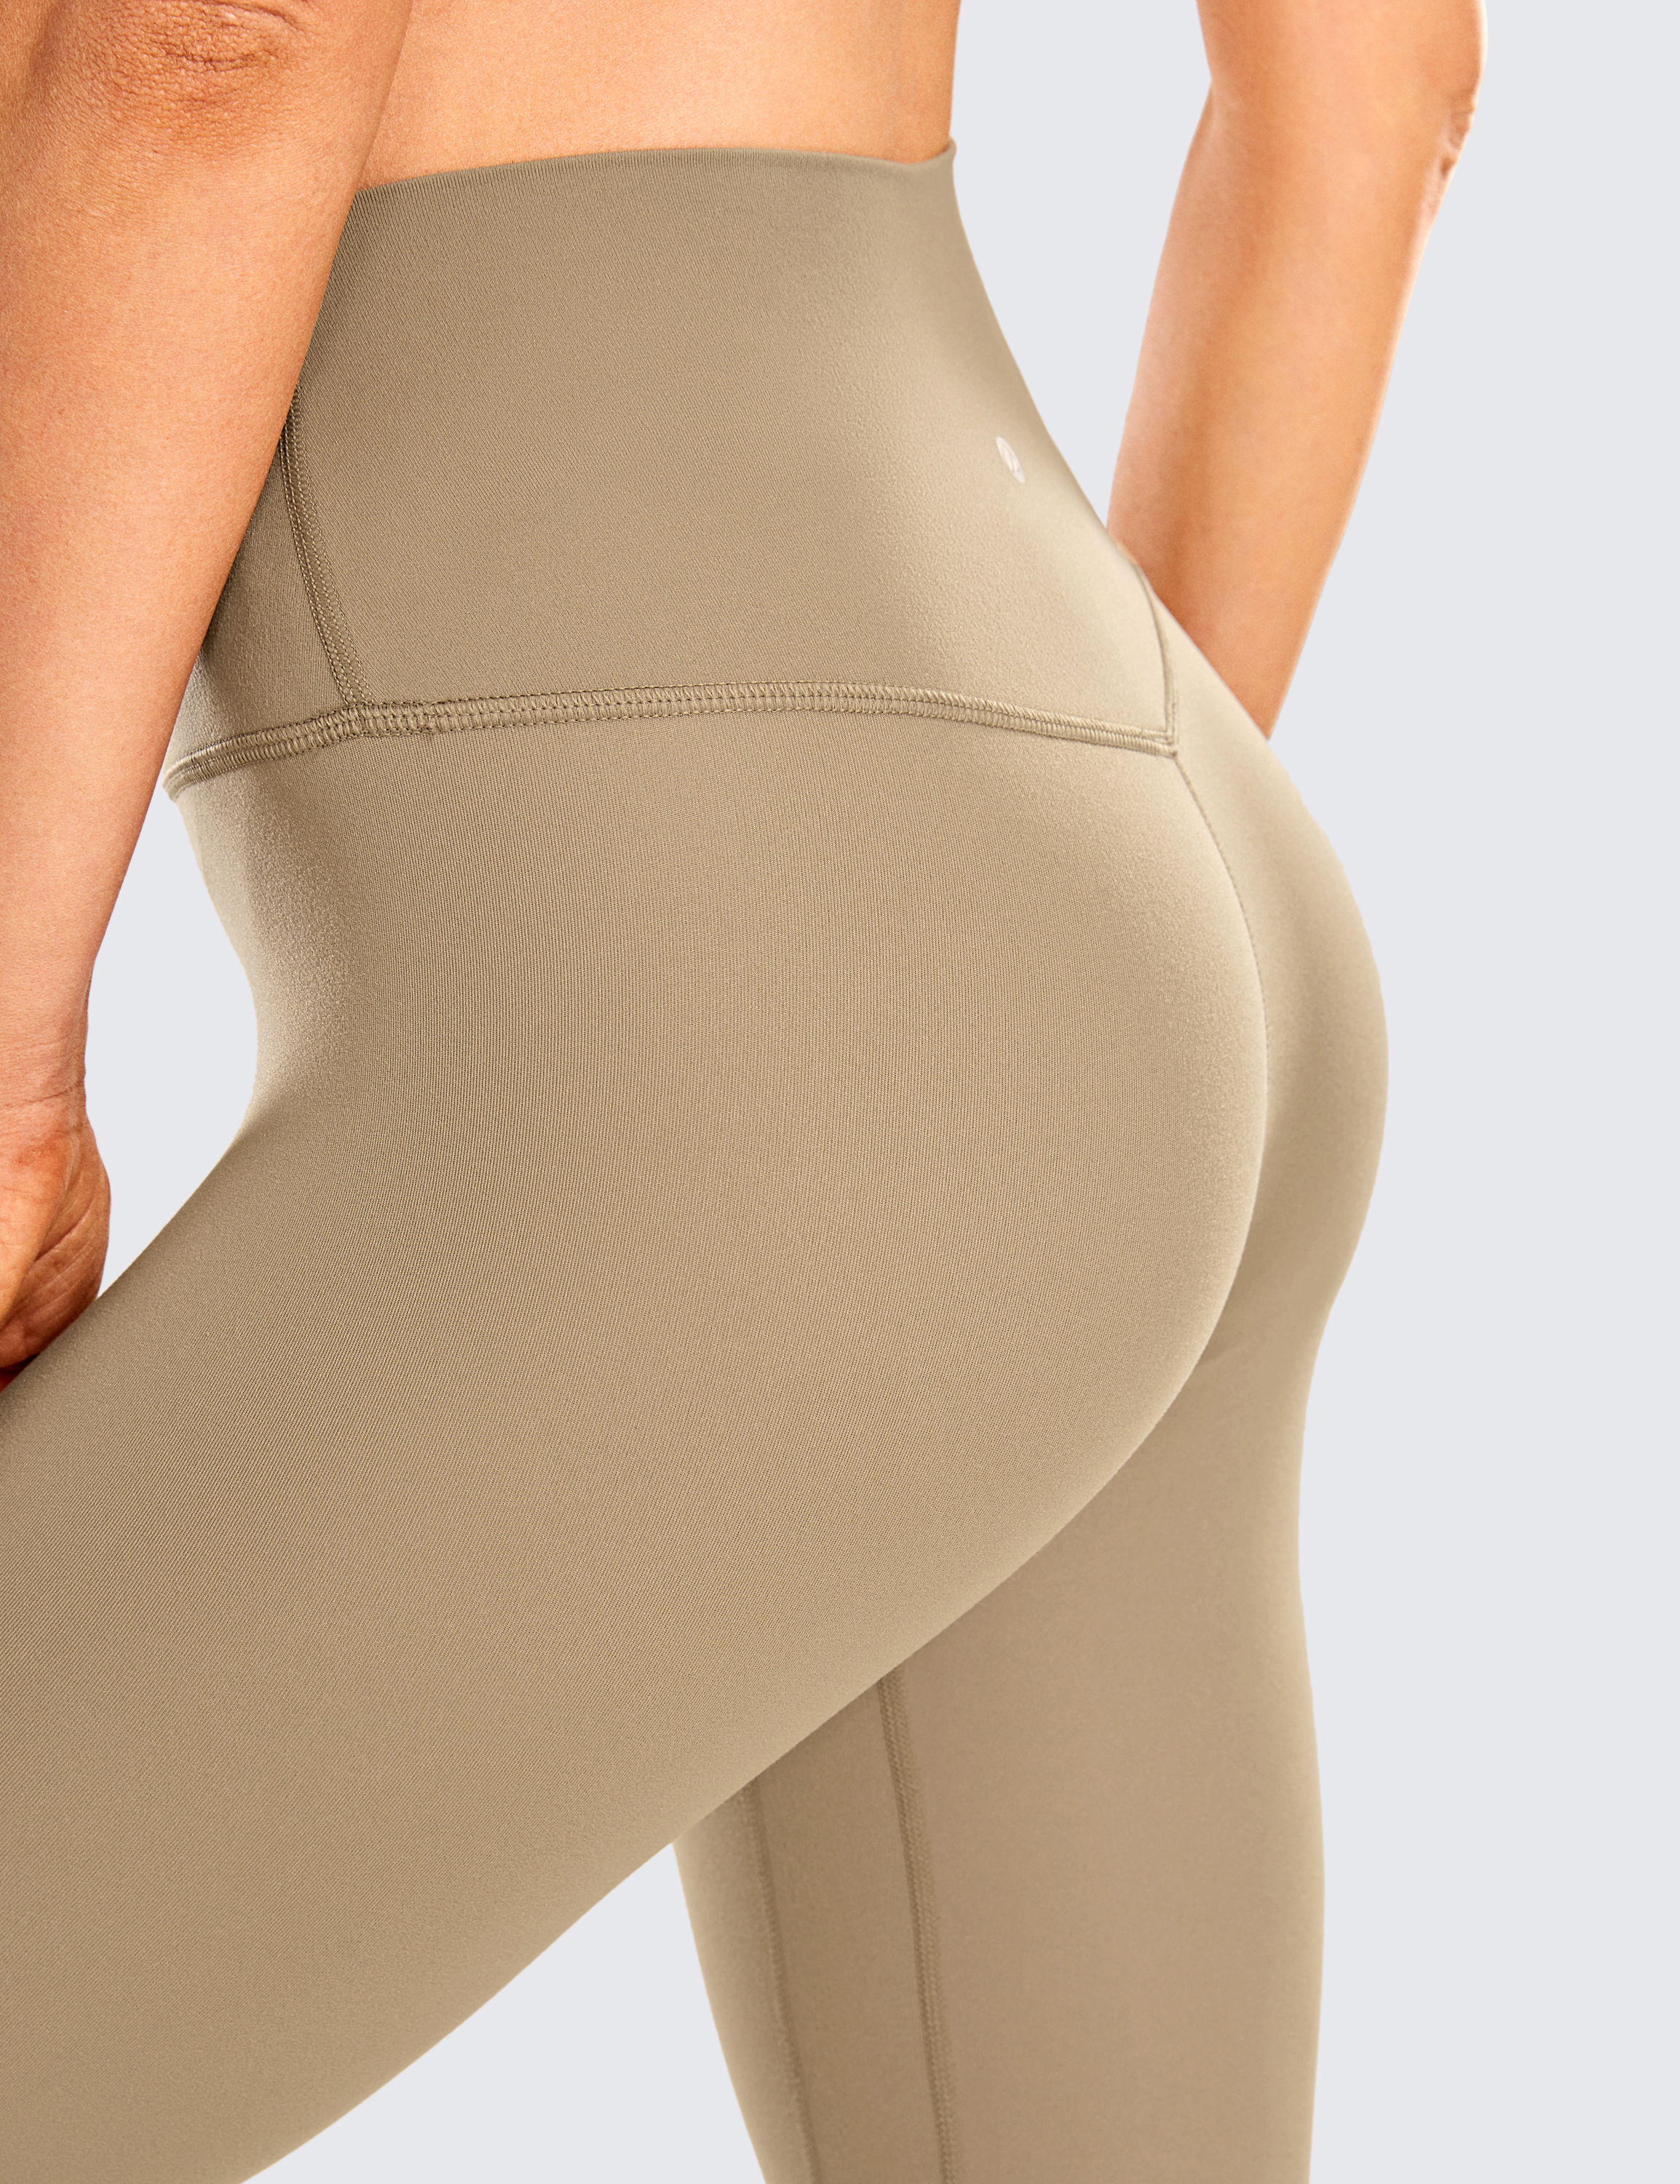 CRZ YOGA Womens Naked Feeling Workout Capris Leggings 21 Inches - High  Waisted Gym Tummy Control Yoga Pants with Pockets, The Heartbeat Powder, XL:  Buy Online at Best Price in UAE 